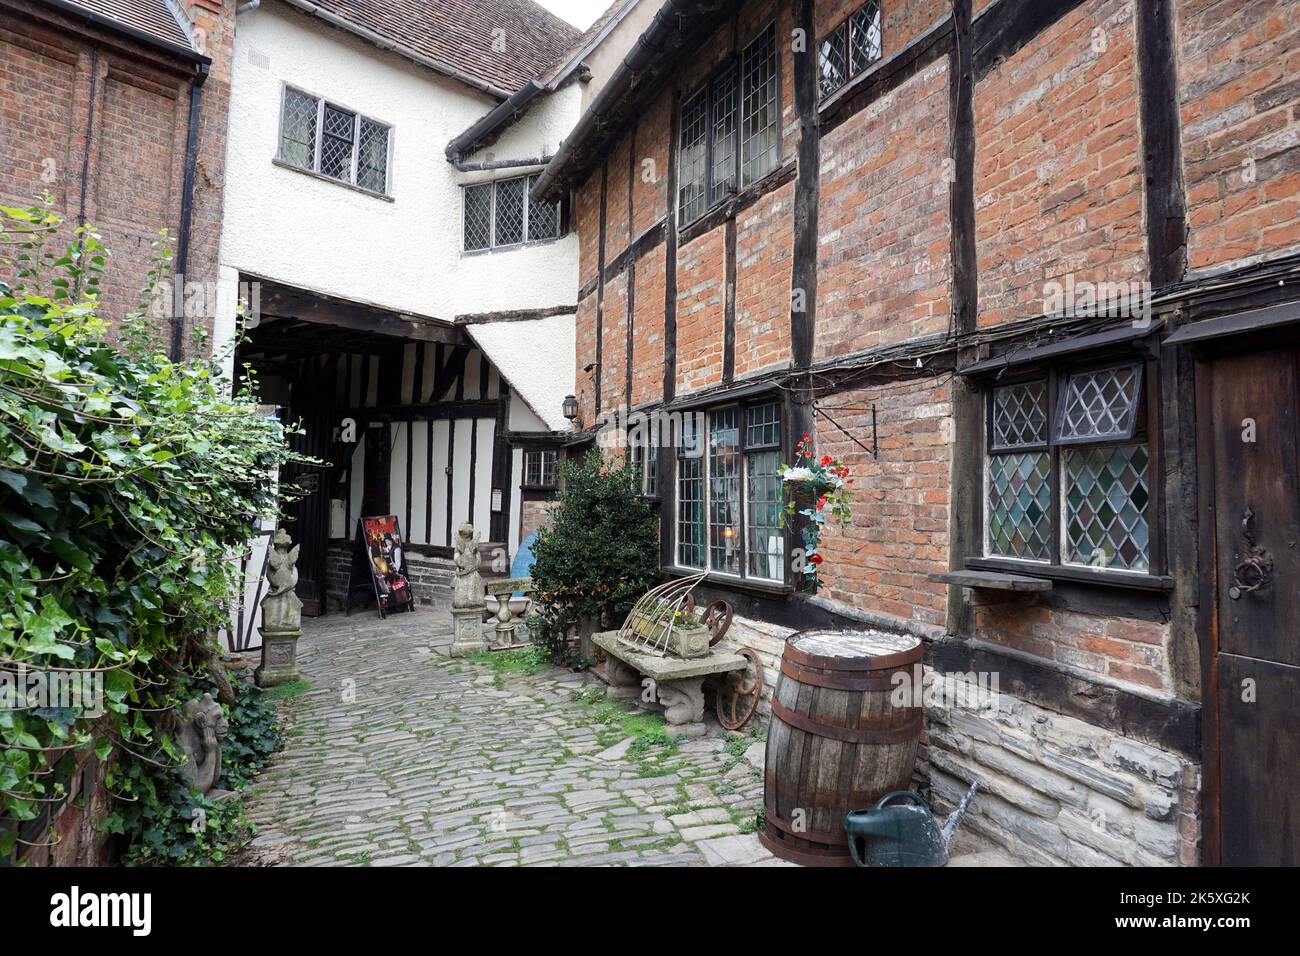 A side street in Stratford upon Avon, England Stock Photo